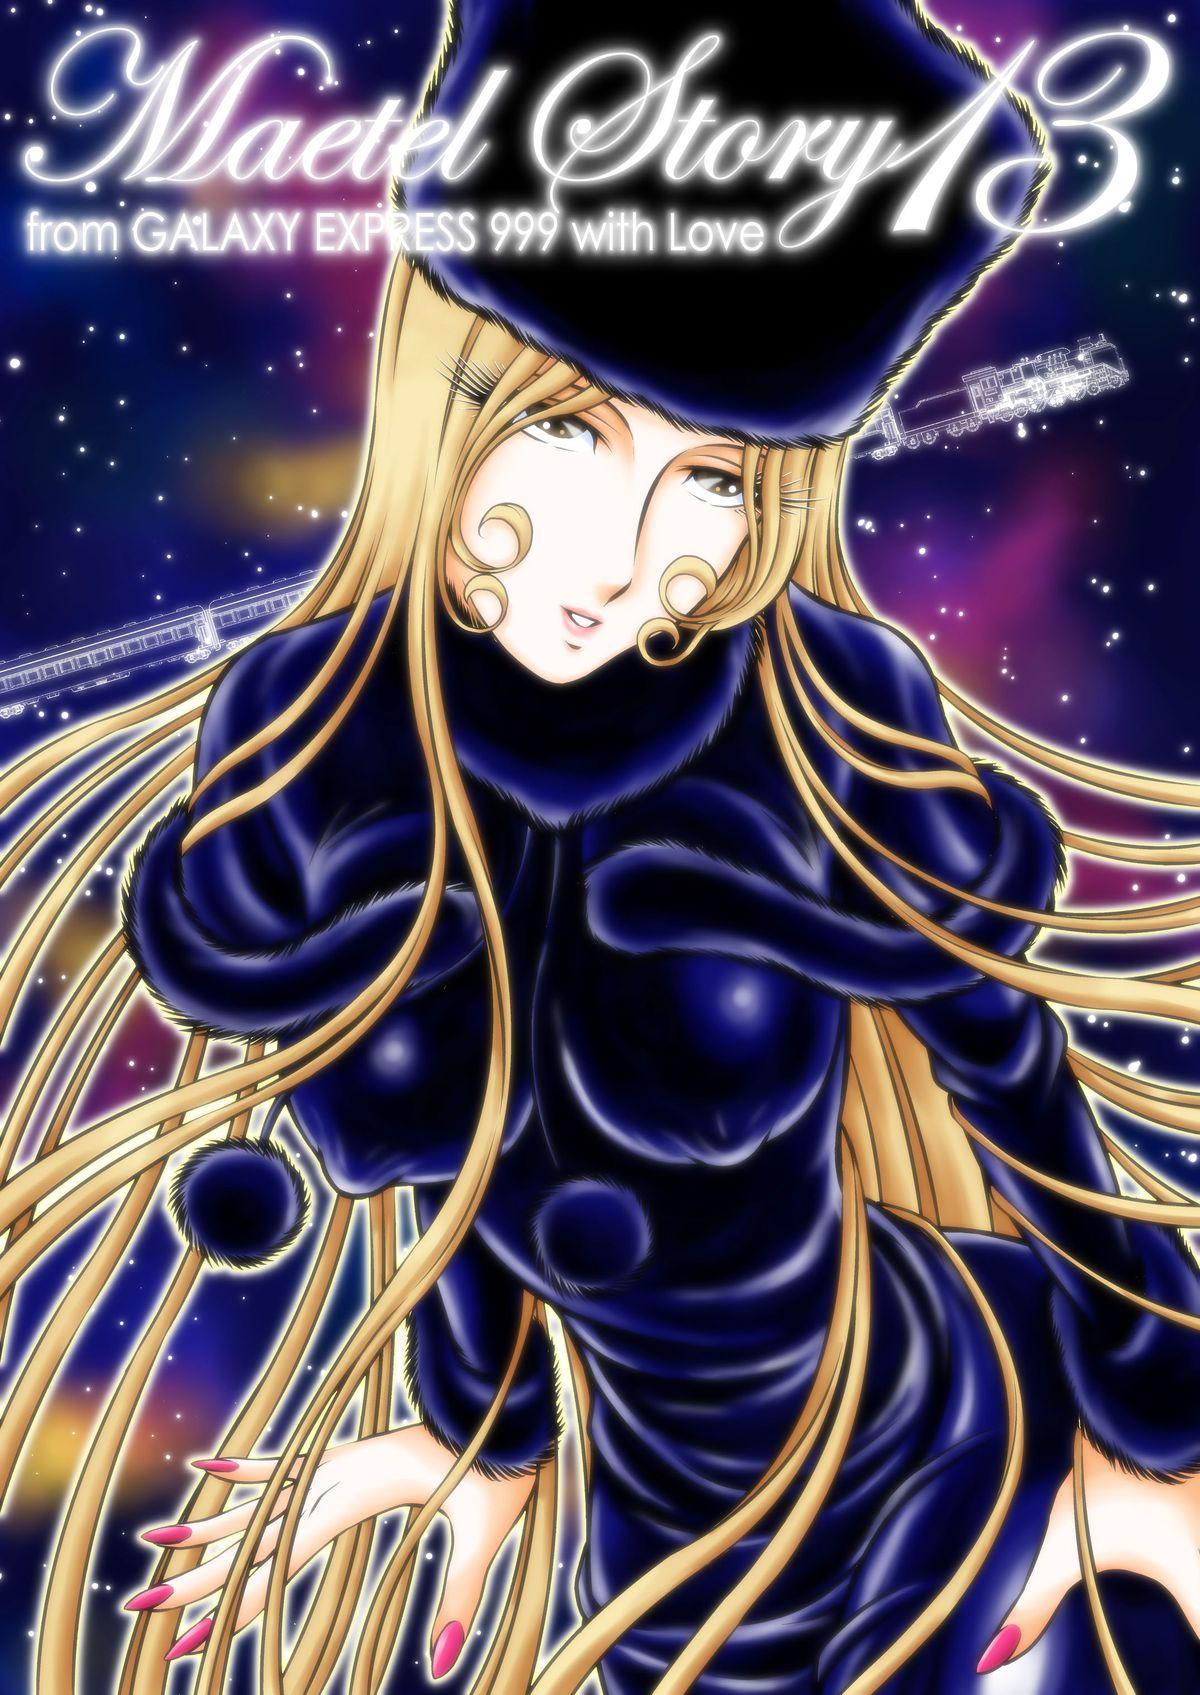 Orgasms Maetel Story 13 - Galaxy express 999 Round Ass - Page 1